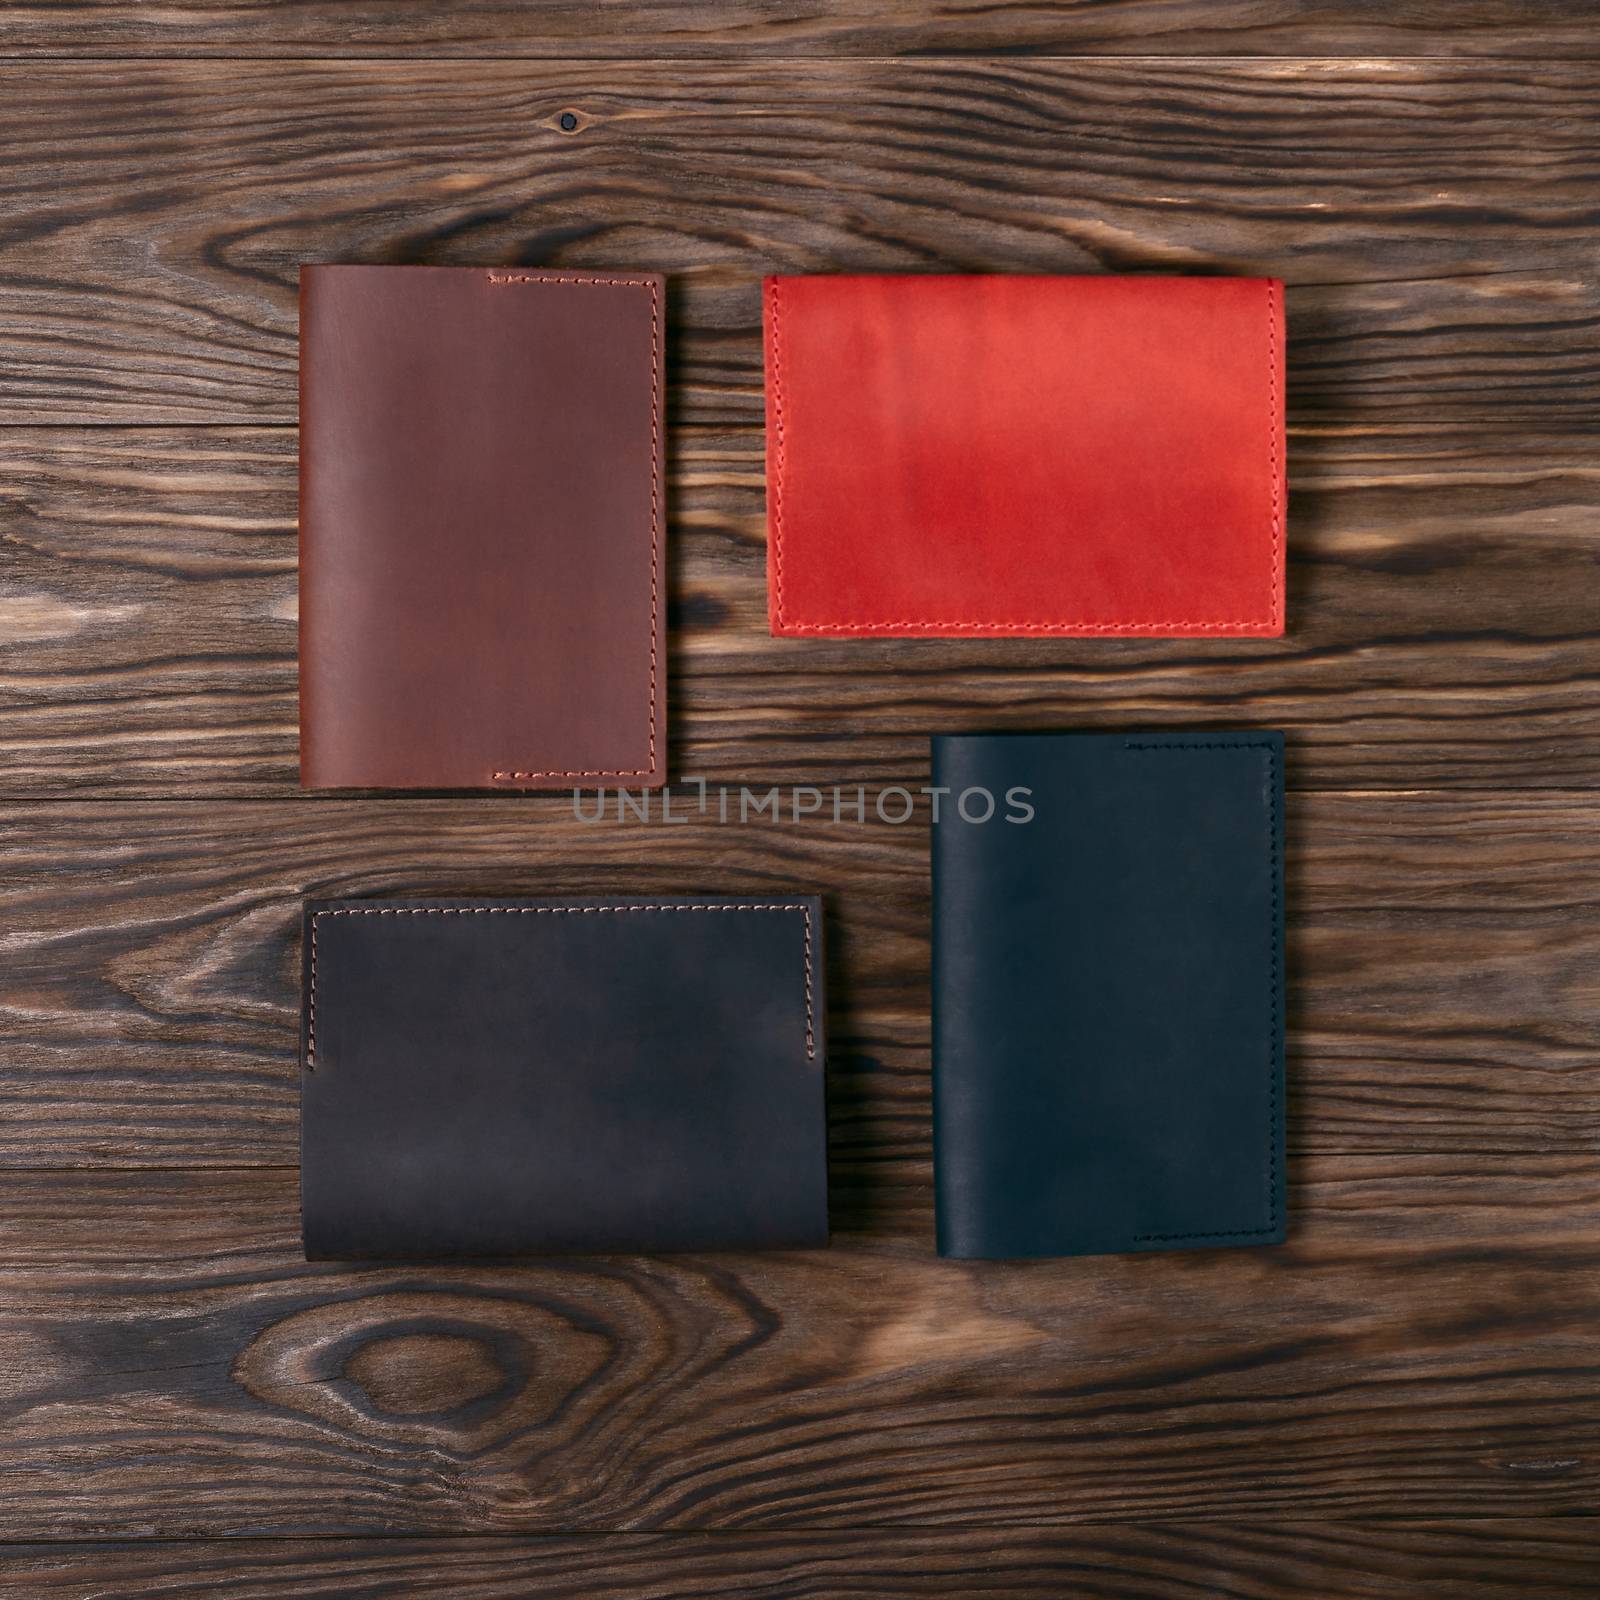 Four handmade leather passport covers on wooden textured background. Black, red, ginger and brown covers. Up to down view. Stock photo of luxury accessories. by alexsdriver